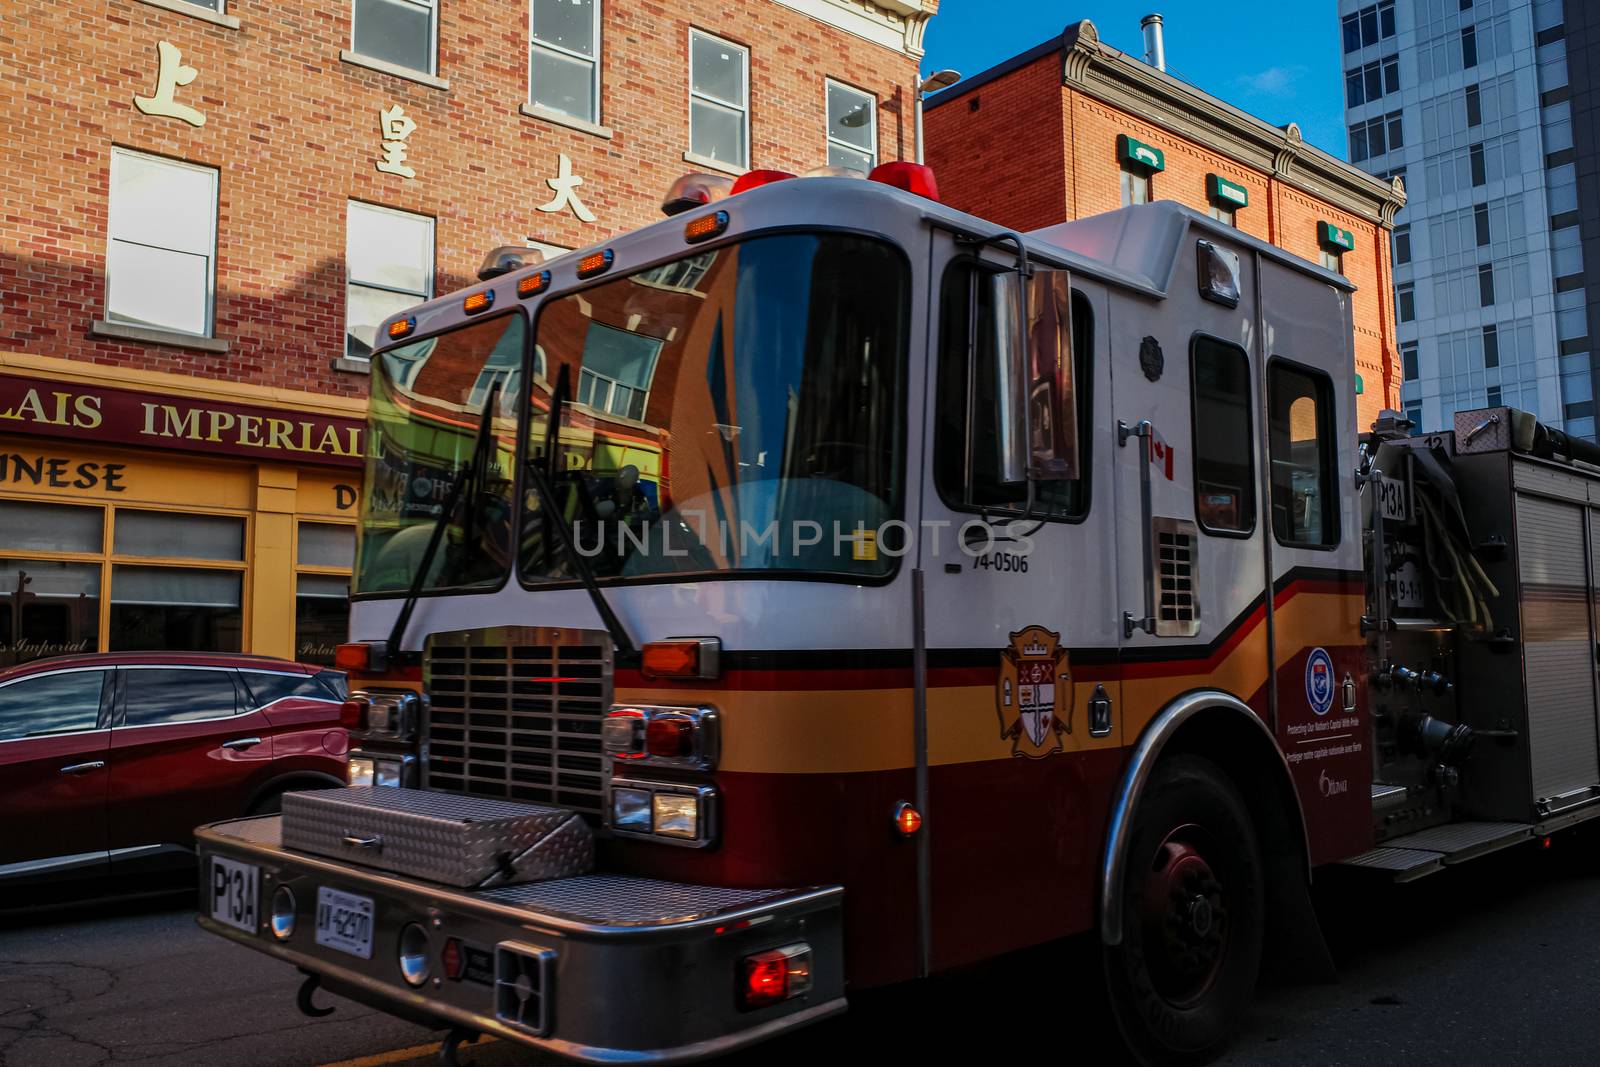 Ottawa, Ontario, Canada - November 18, 2020: An Ottawa Fire Services fire truck rushes down Dalhousie Street in the ByWard Market in response to an emergency call.